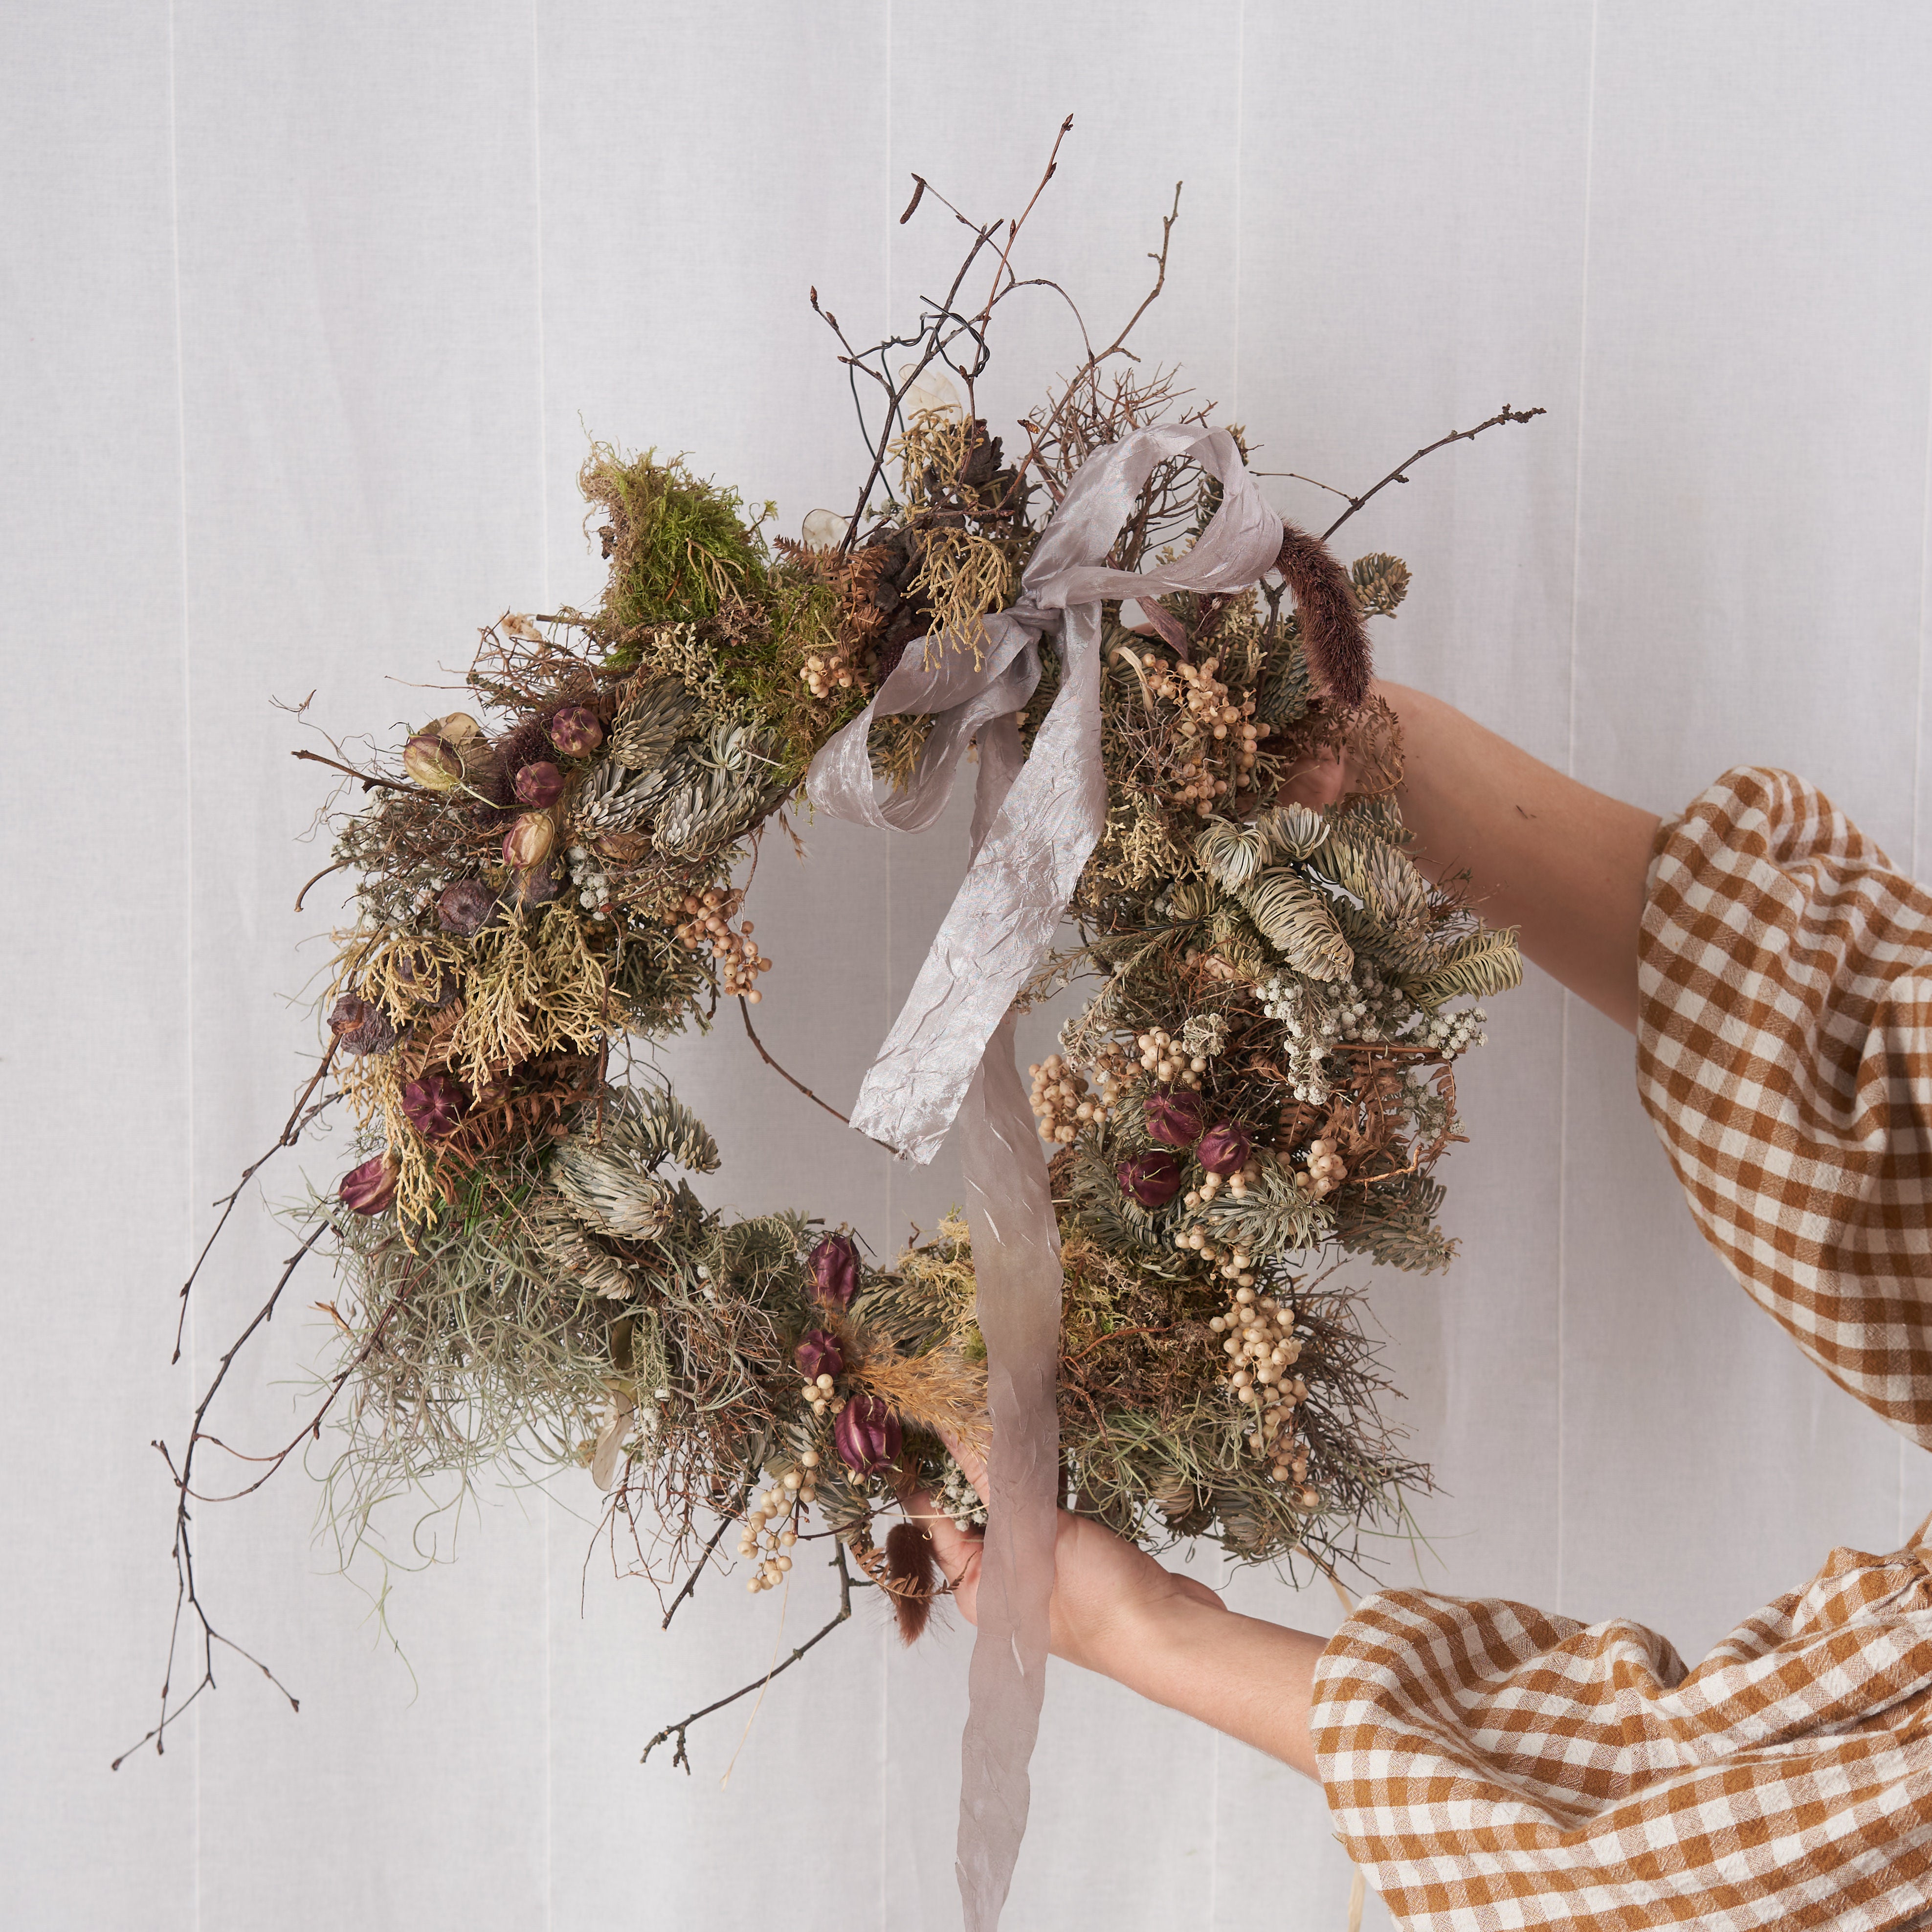 Do it yourself everlasting dried christmas wreath making kit by Botanique Workshop London